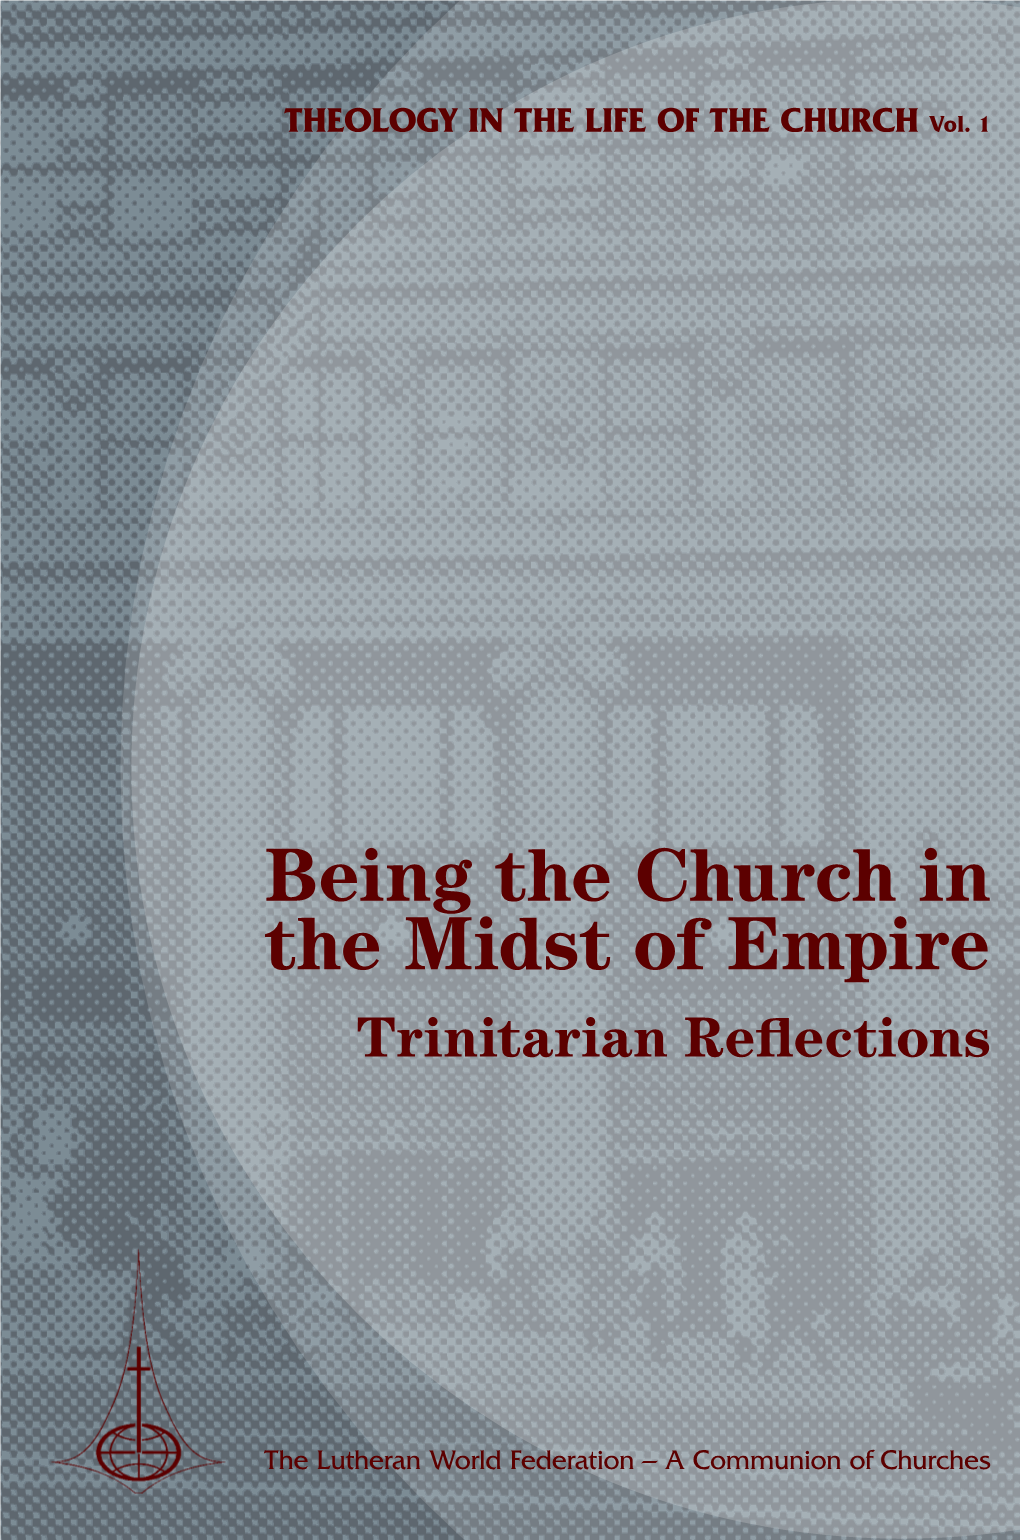 Being the Church in the Midst of Empire